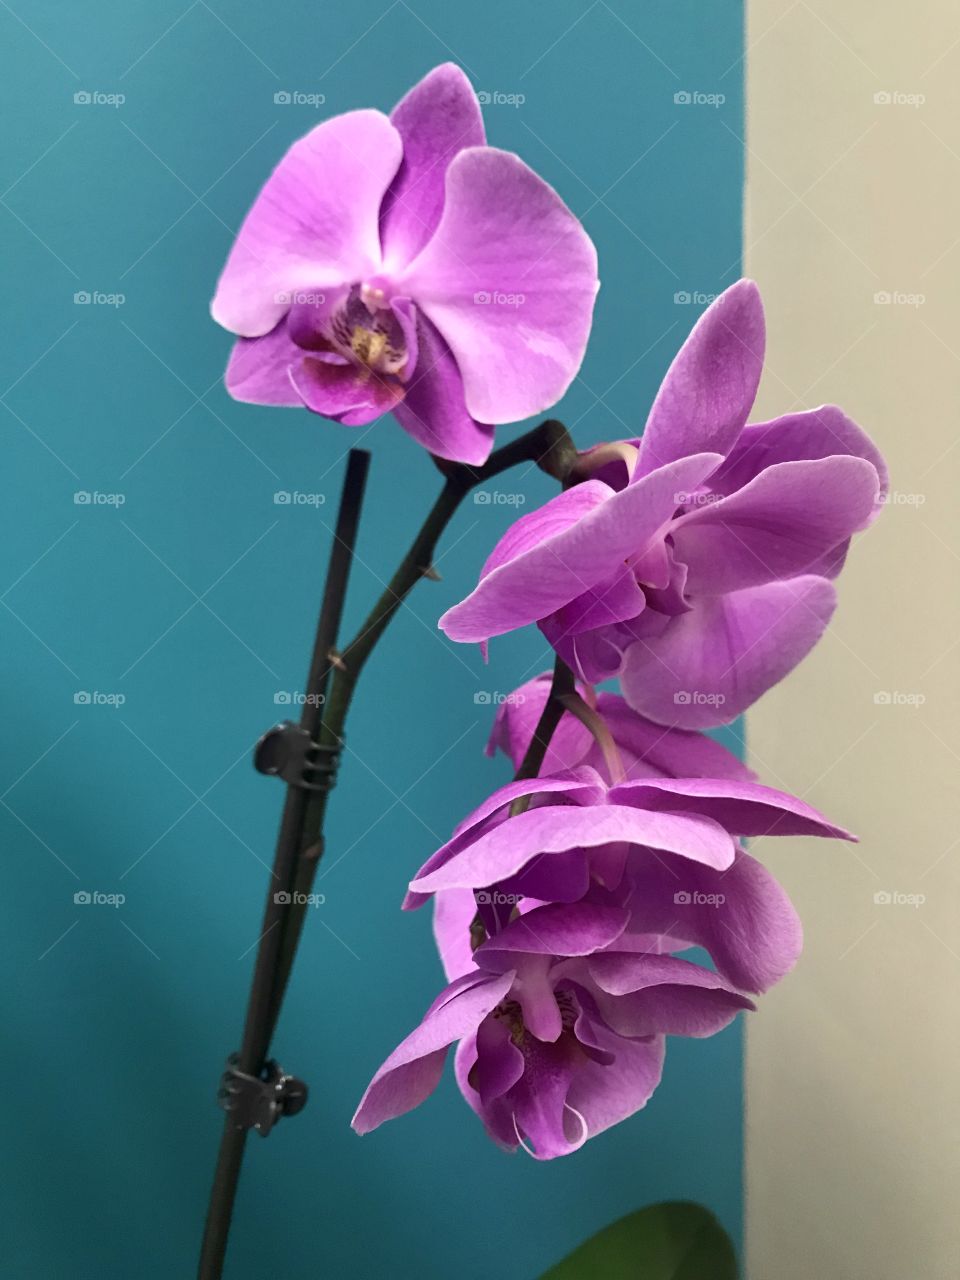 Purple orchid flower in bloom against a teal wall